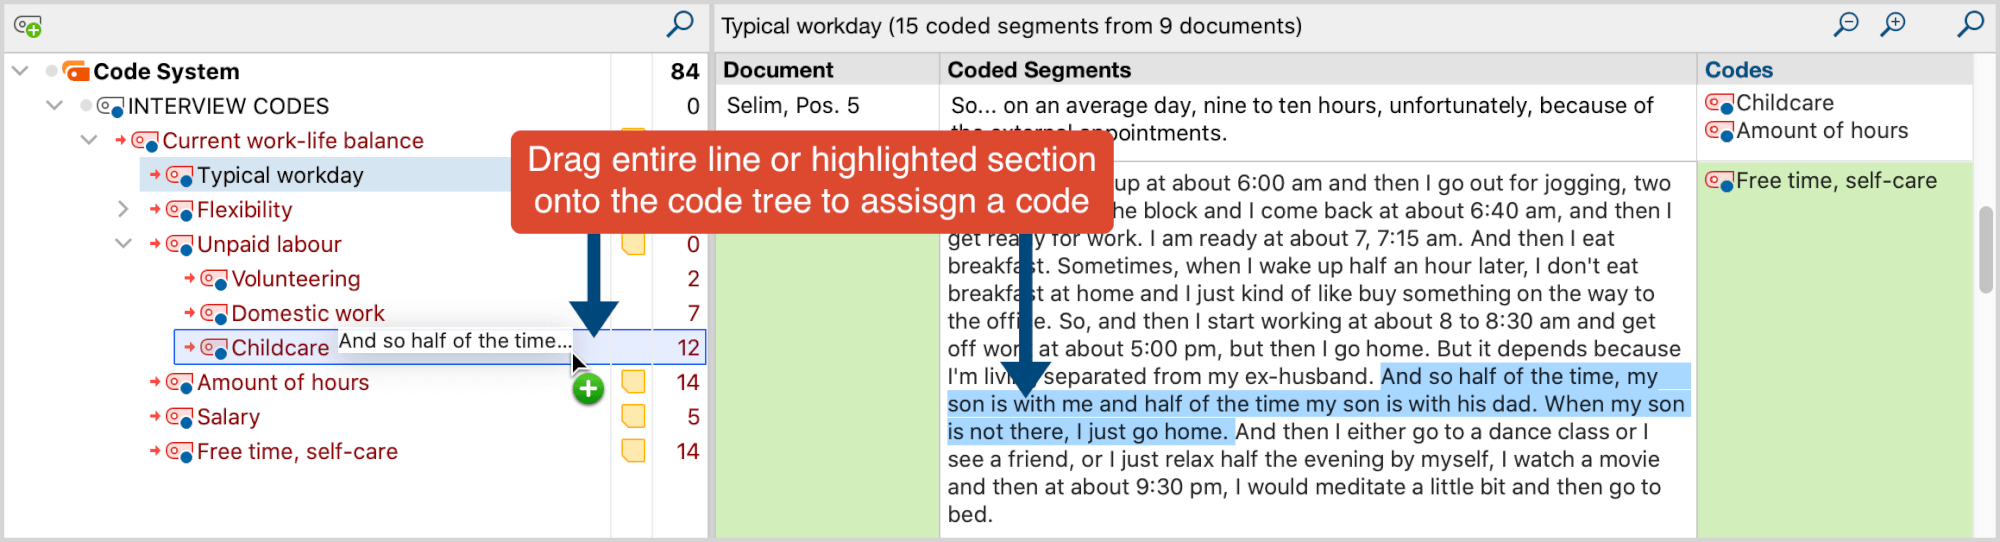 Assigning a code to a coded segment text.